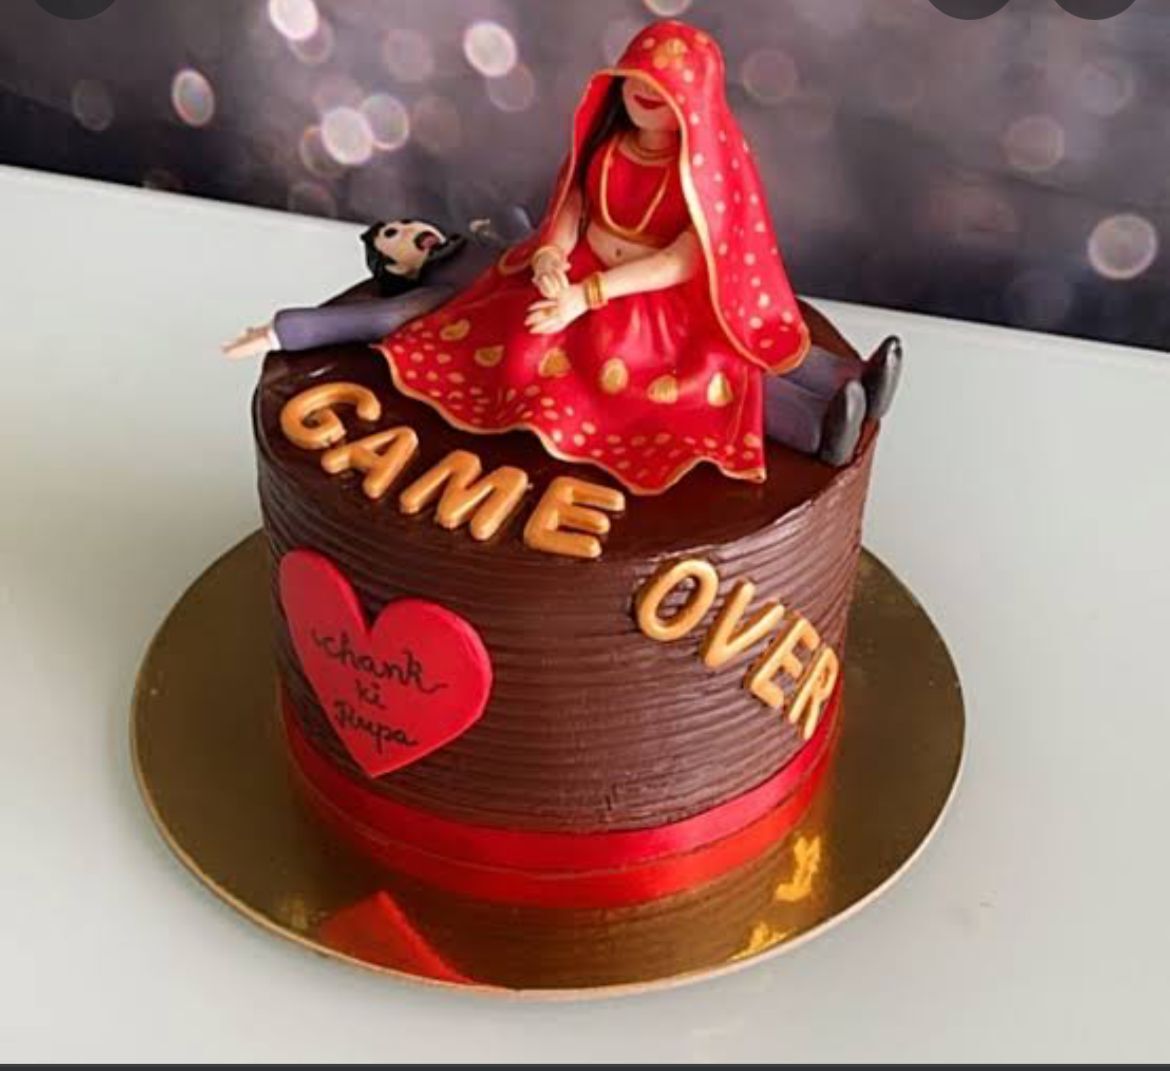 Wedding cake with bride and groom figurine on top. Text on cake reads "Game Over"